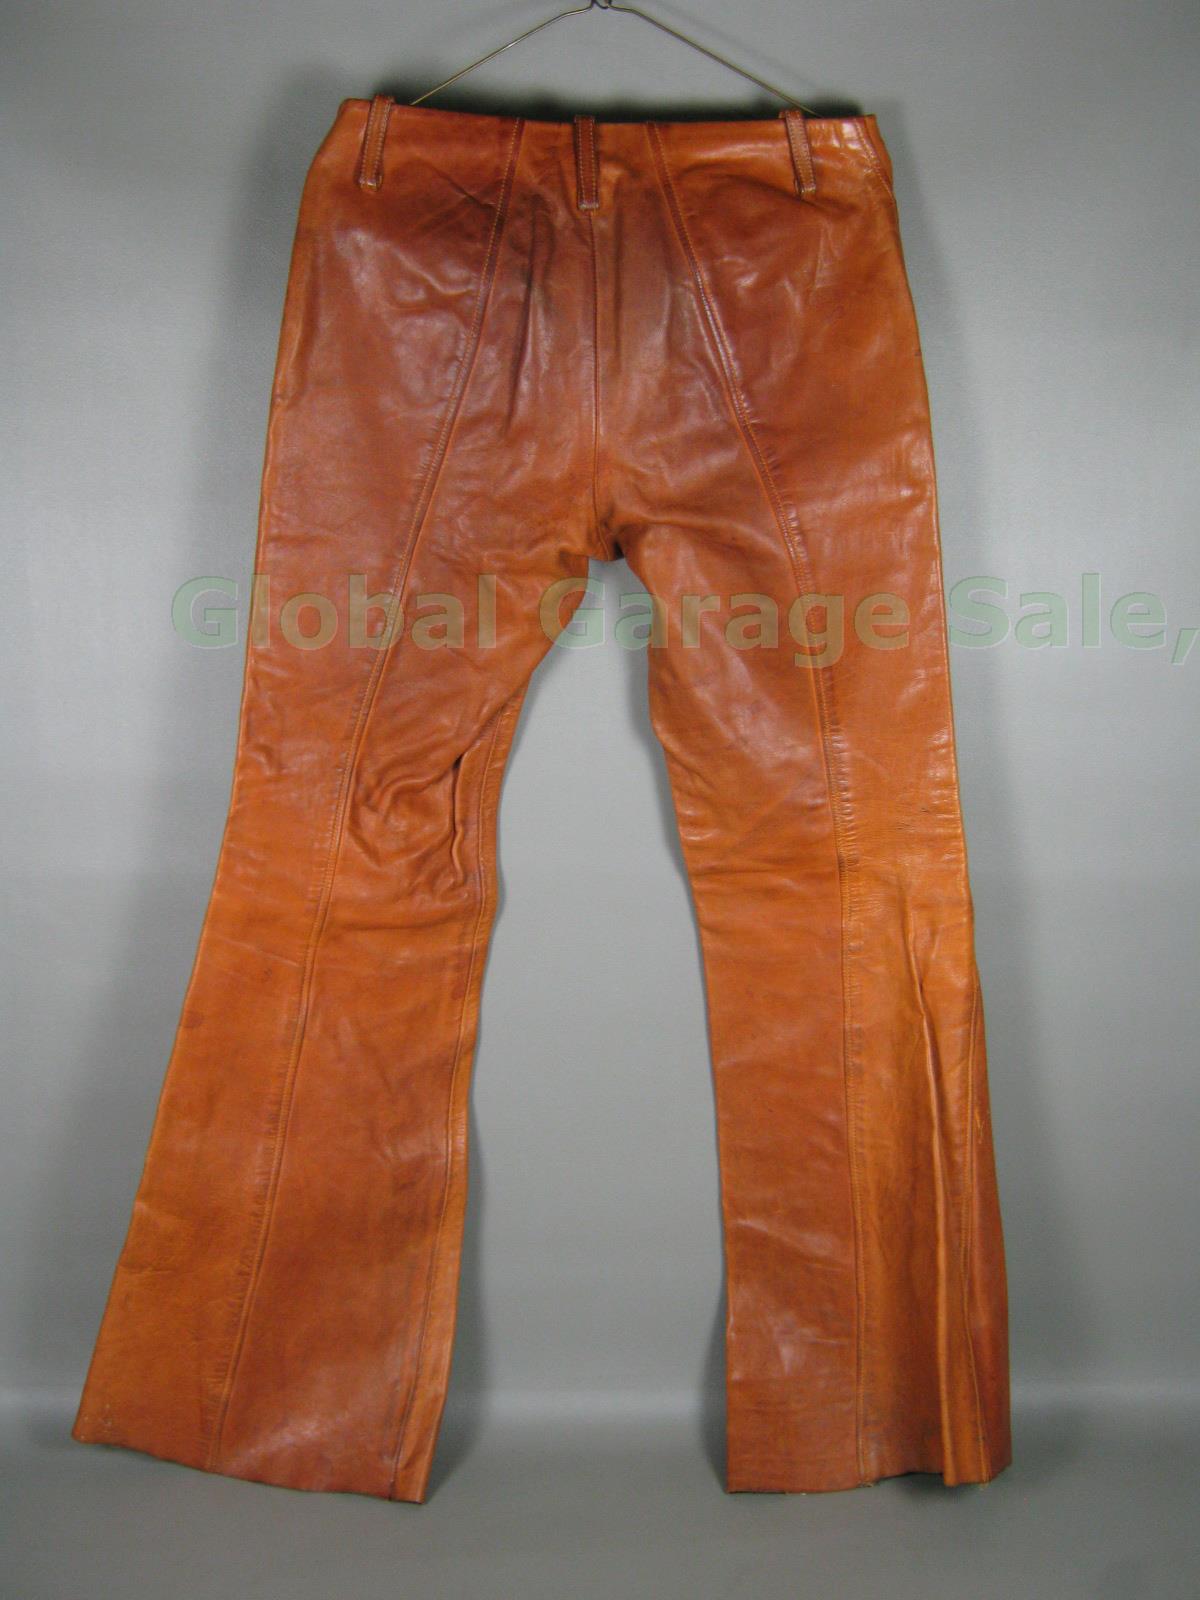 Vtg 1960s 1970s Vermont Made Leather Bell Bottom Hippie Rock Star Pants 31" x32" 4